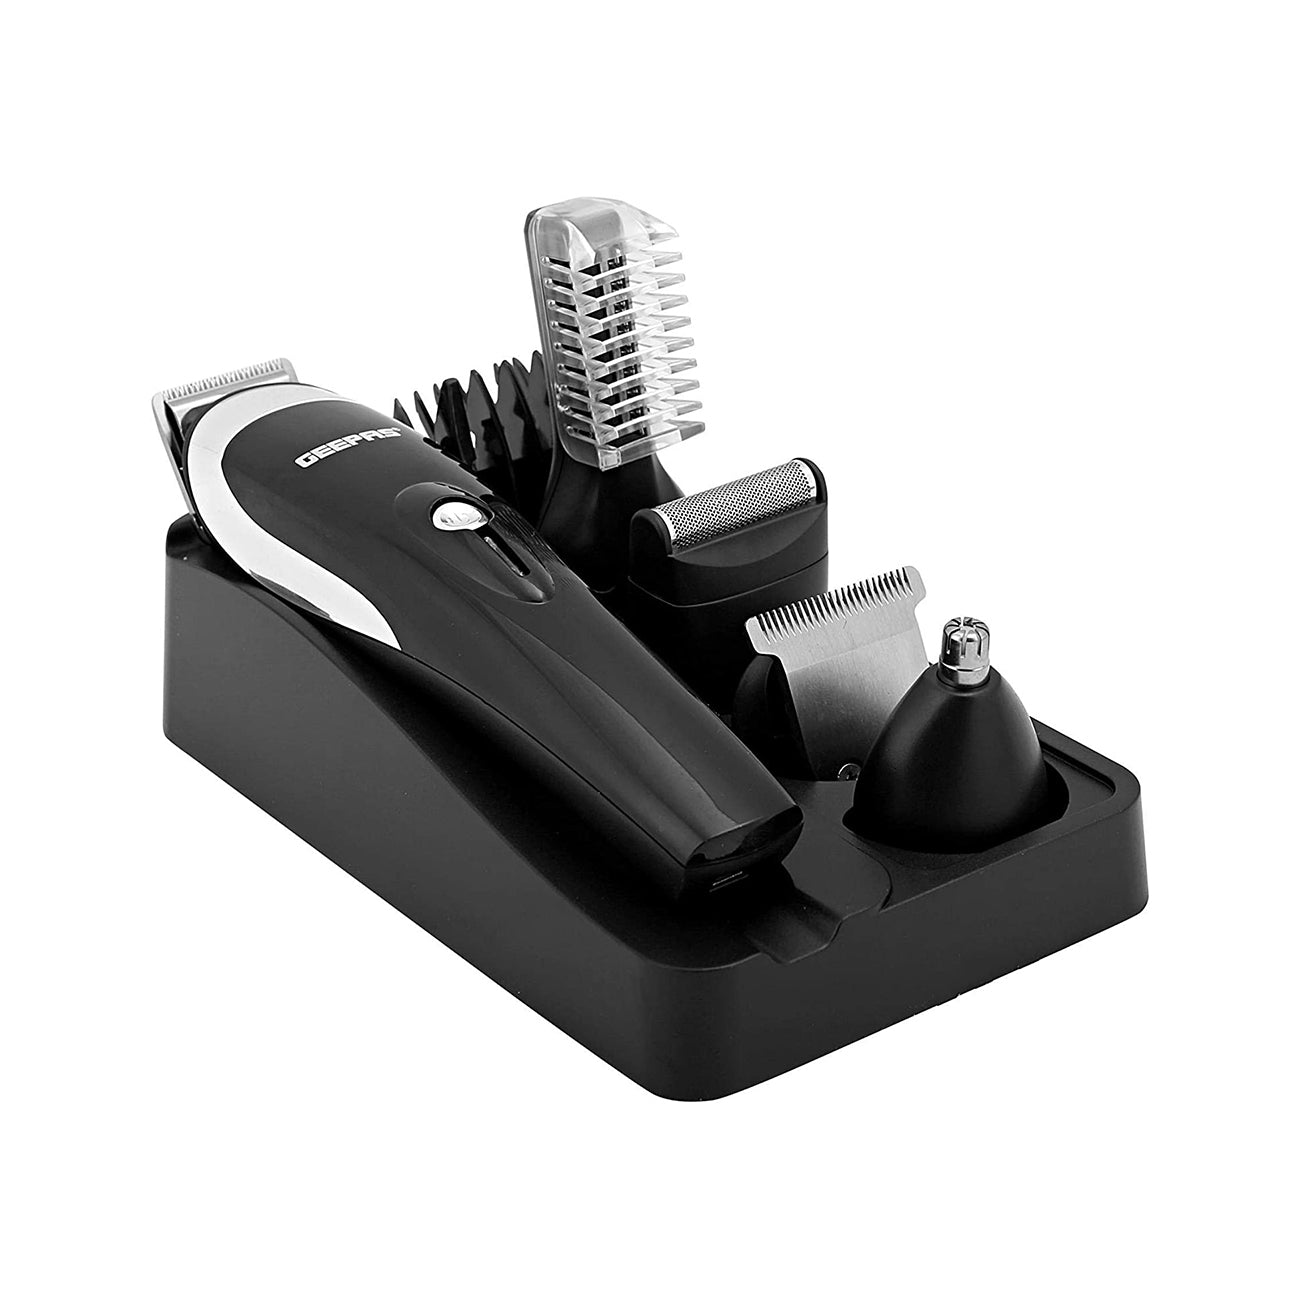 11 In 1 Hair Trimmer - Cordless Hair Clippers, Grooming Kit With Stand, LED Indicators | Trimming Kit With 5 Interchangeable Heads For Shaving, Detailing, Grooming Beards, Mustaches, Stubble, Nose And Body